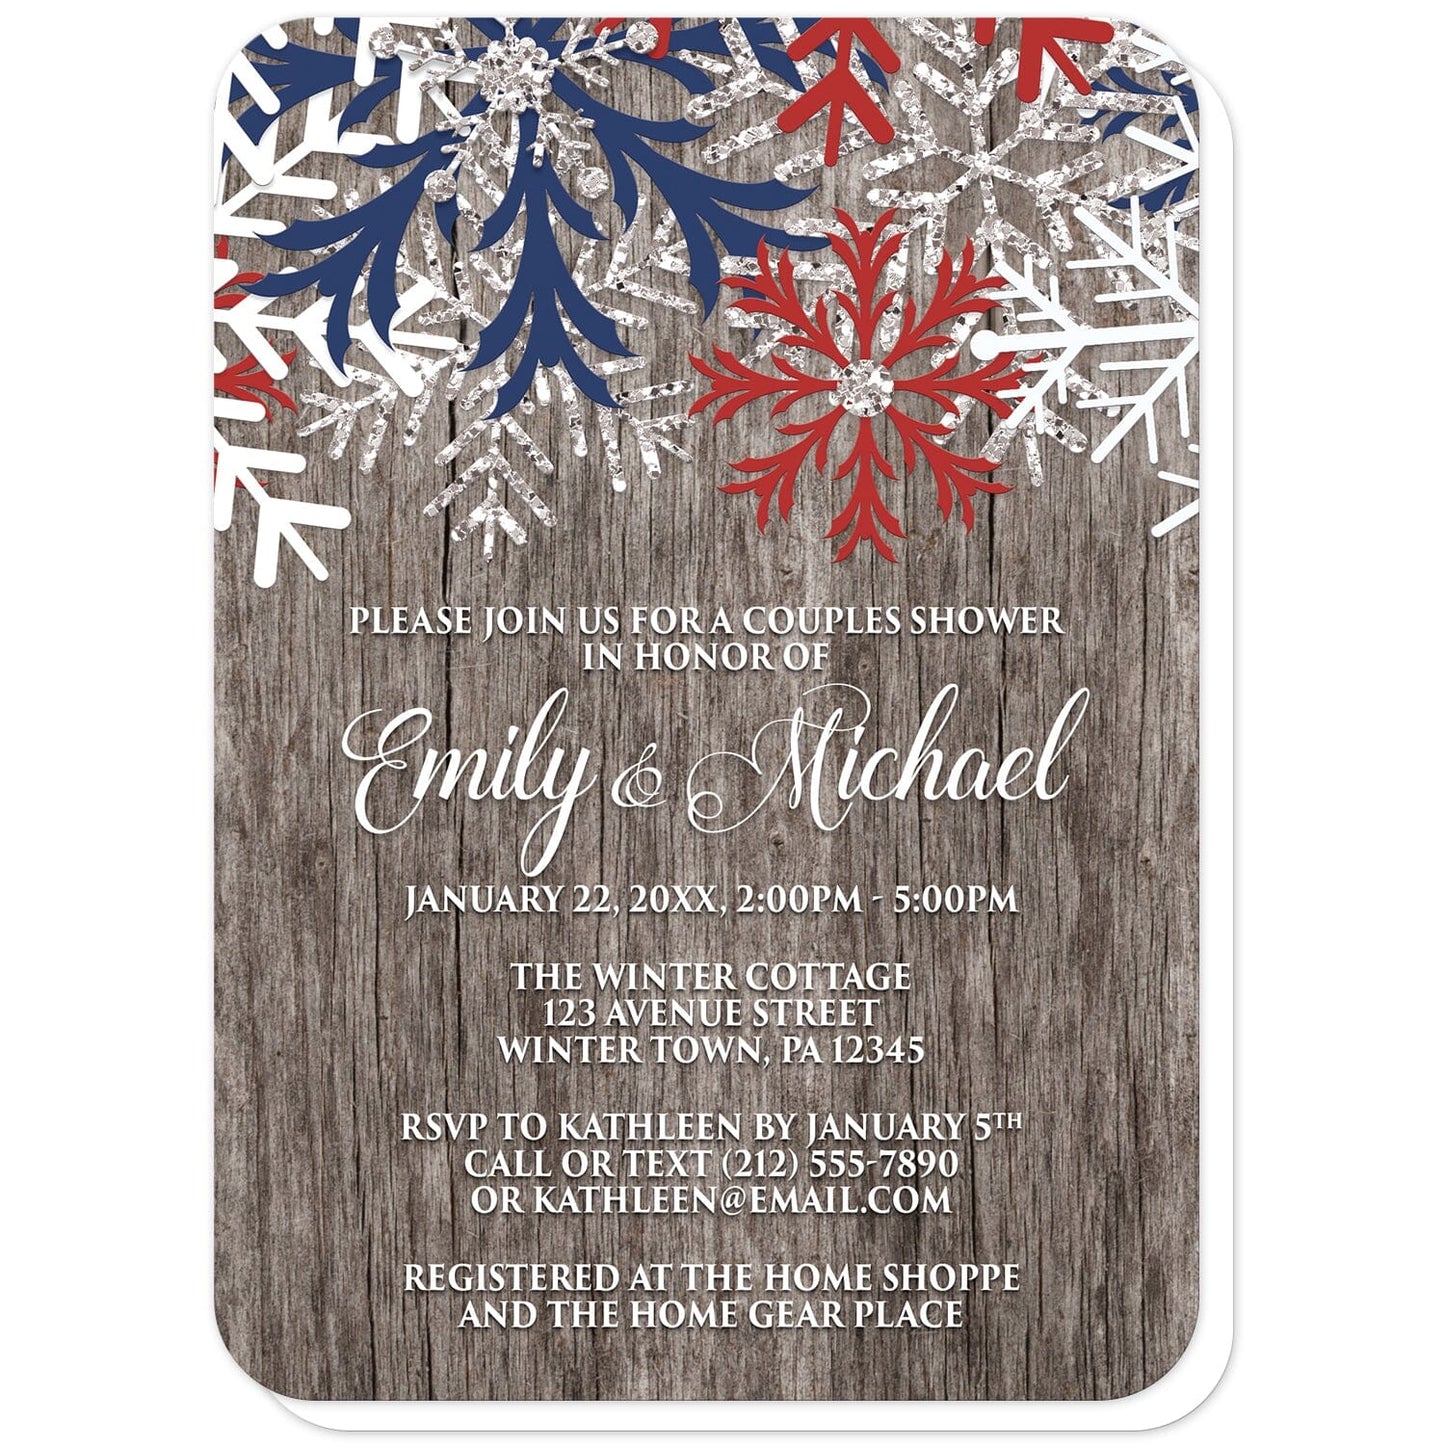 Rustic Winter Wood Navy Maroon Snowflake Couples Shower Invitations (with rounded corners) at Artistically Invited. Country-inspired rustic winter wood navy maroon snowflake couples shower invitations designed with maroon red, navy blue, white, and silver-colored glitter-illustrated snowflakes along the top over a rustic wood pattern illustration. Your personalized couples shower celebration details are custom printed in white over the wood background below the snowflakes.